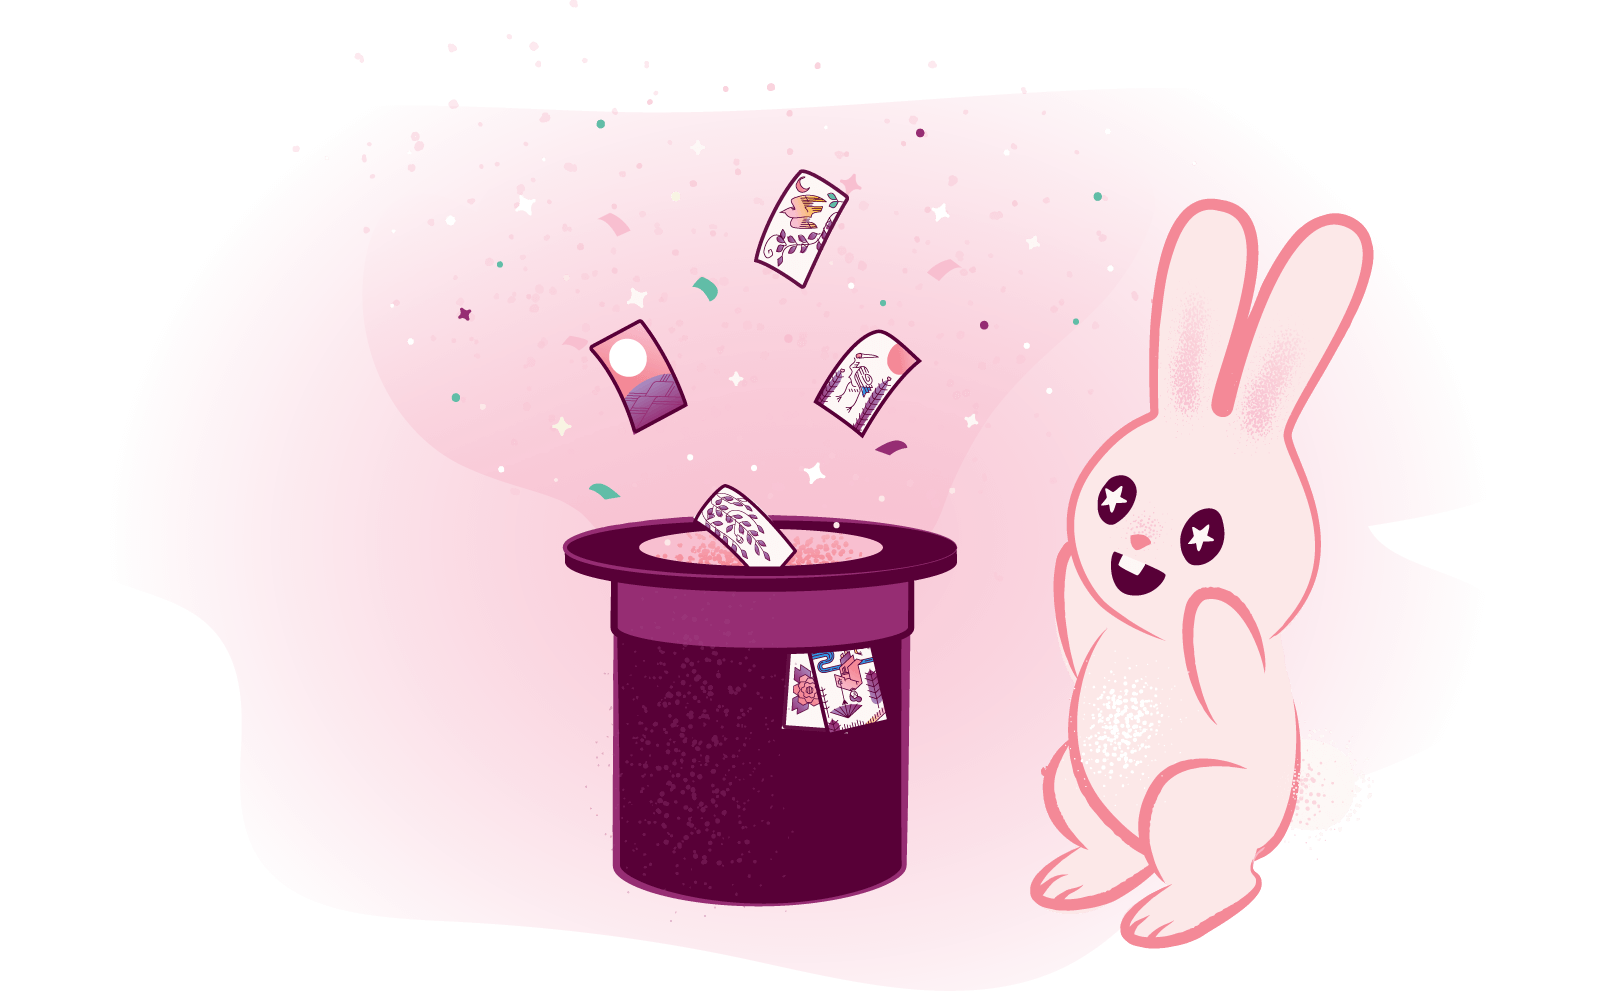 a rabbit gasps as hanafuda playing cards fly from a magic hat